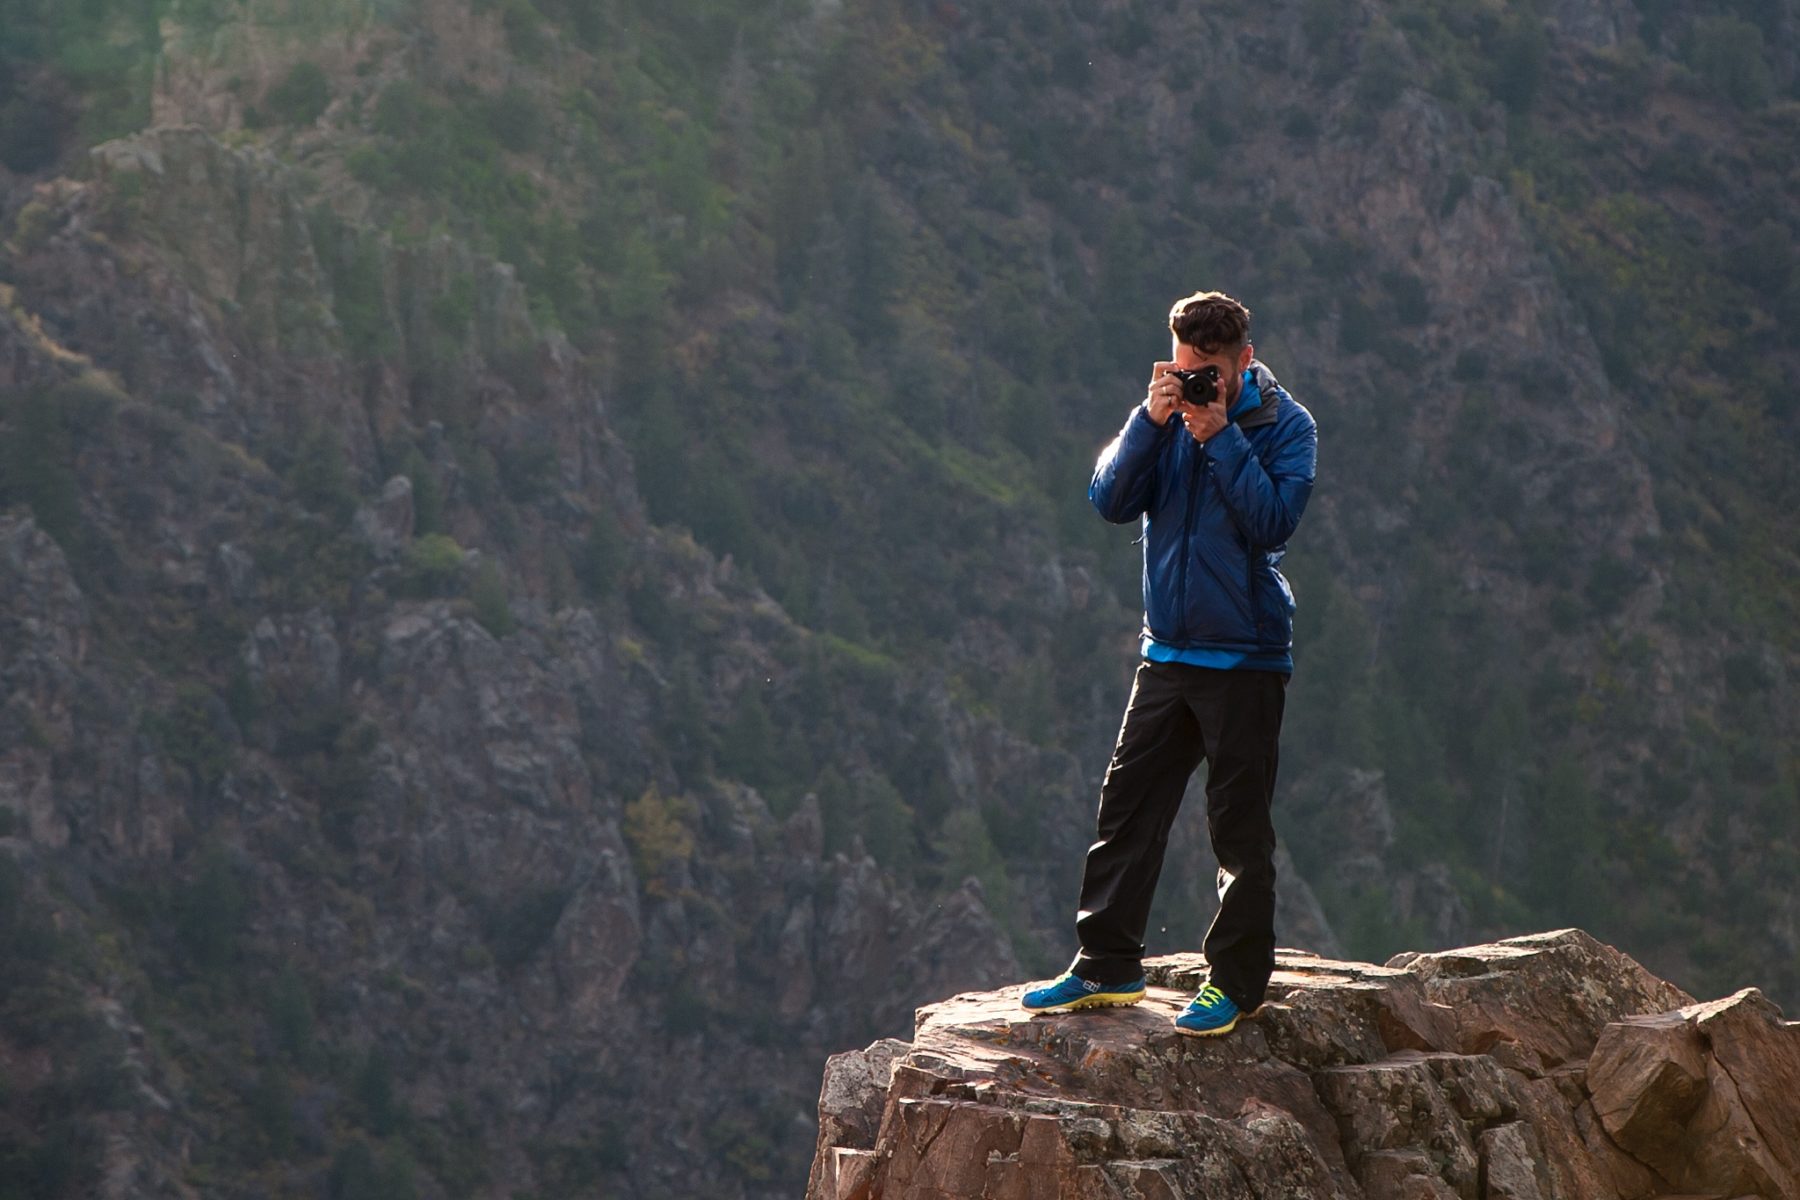 Stavros shooting in Black Canyon of the Gunnison National Park